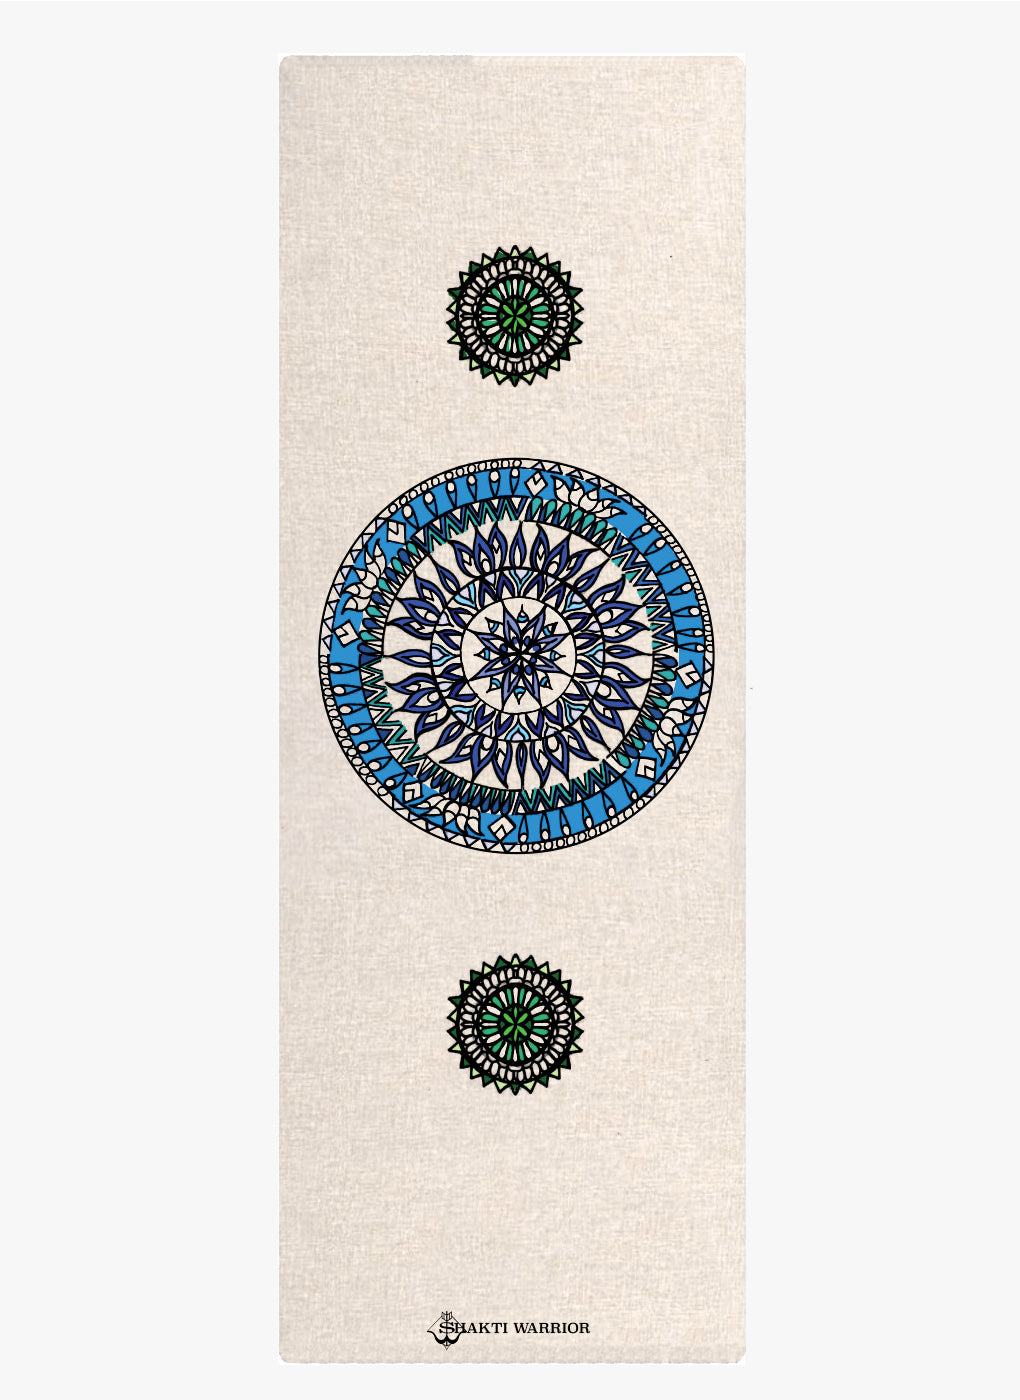 Shakti Warrior Mandala Design Hemp Yoga Mat - Experience ancient symbolism on a hemp mat, renowned for its natural grip, durability, and eco-conscious luxury. Elevate your practice with superior hemp properties.